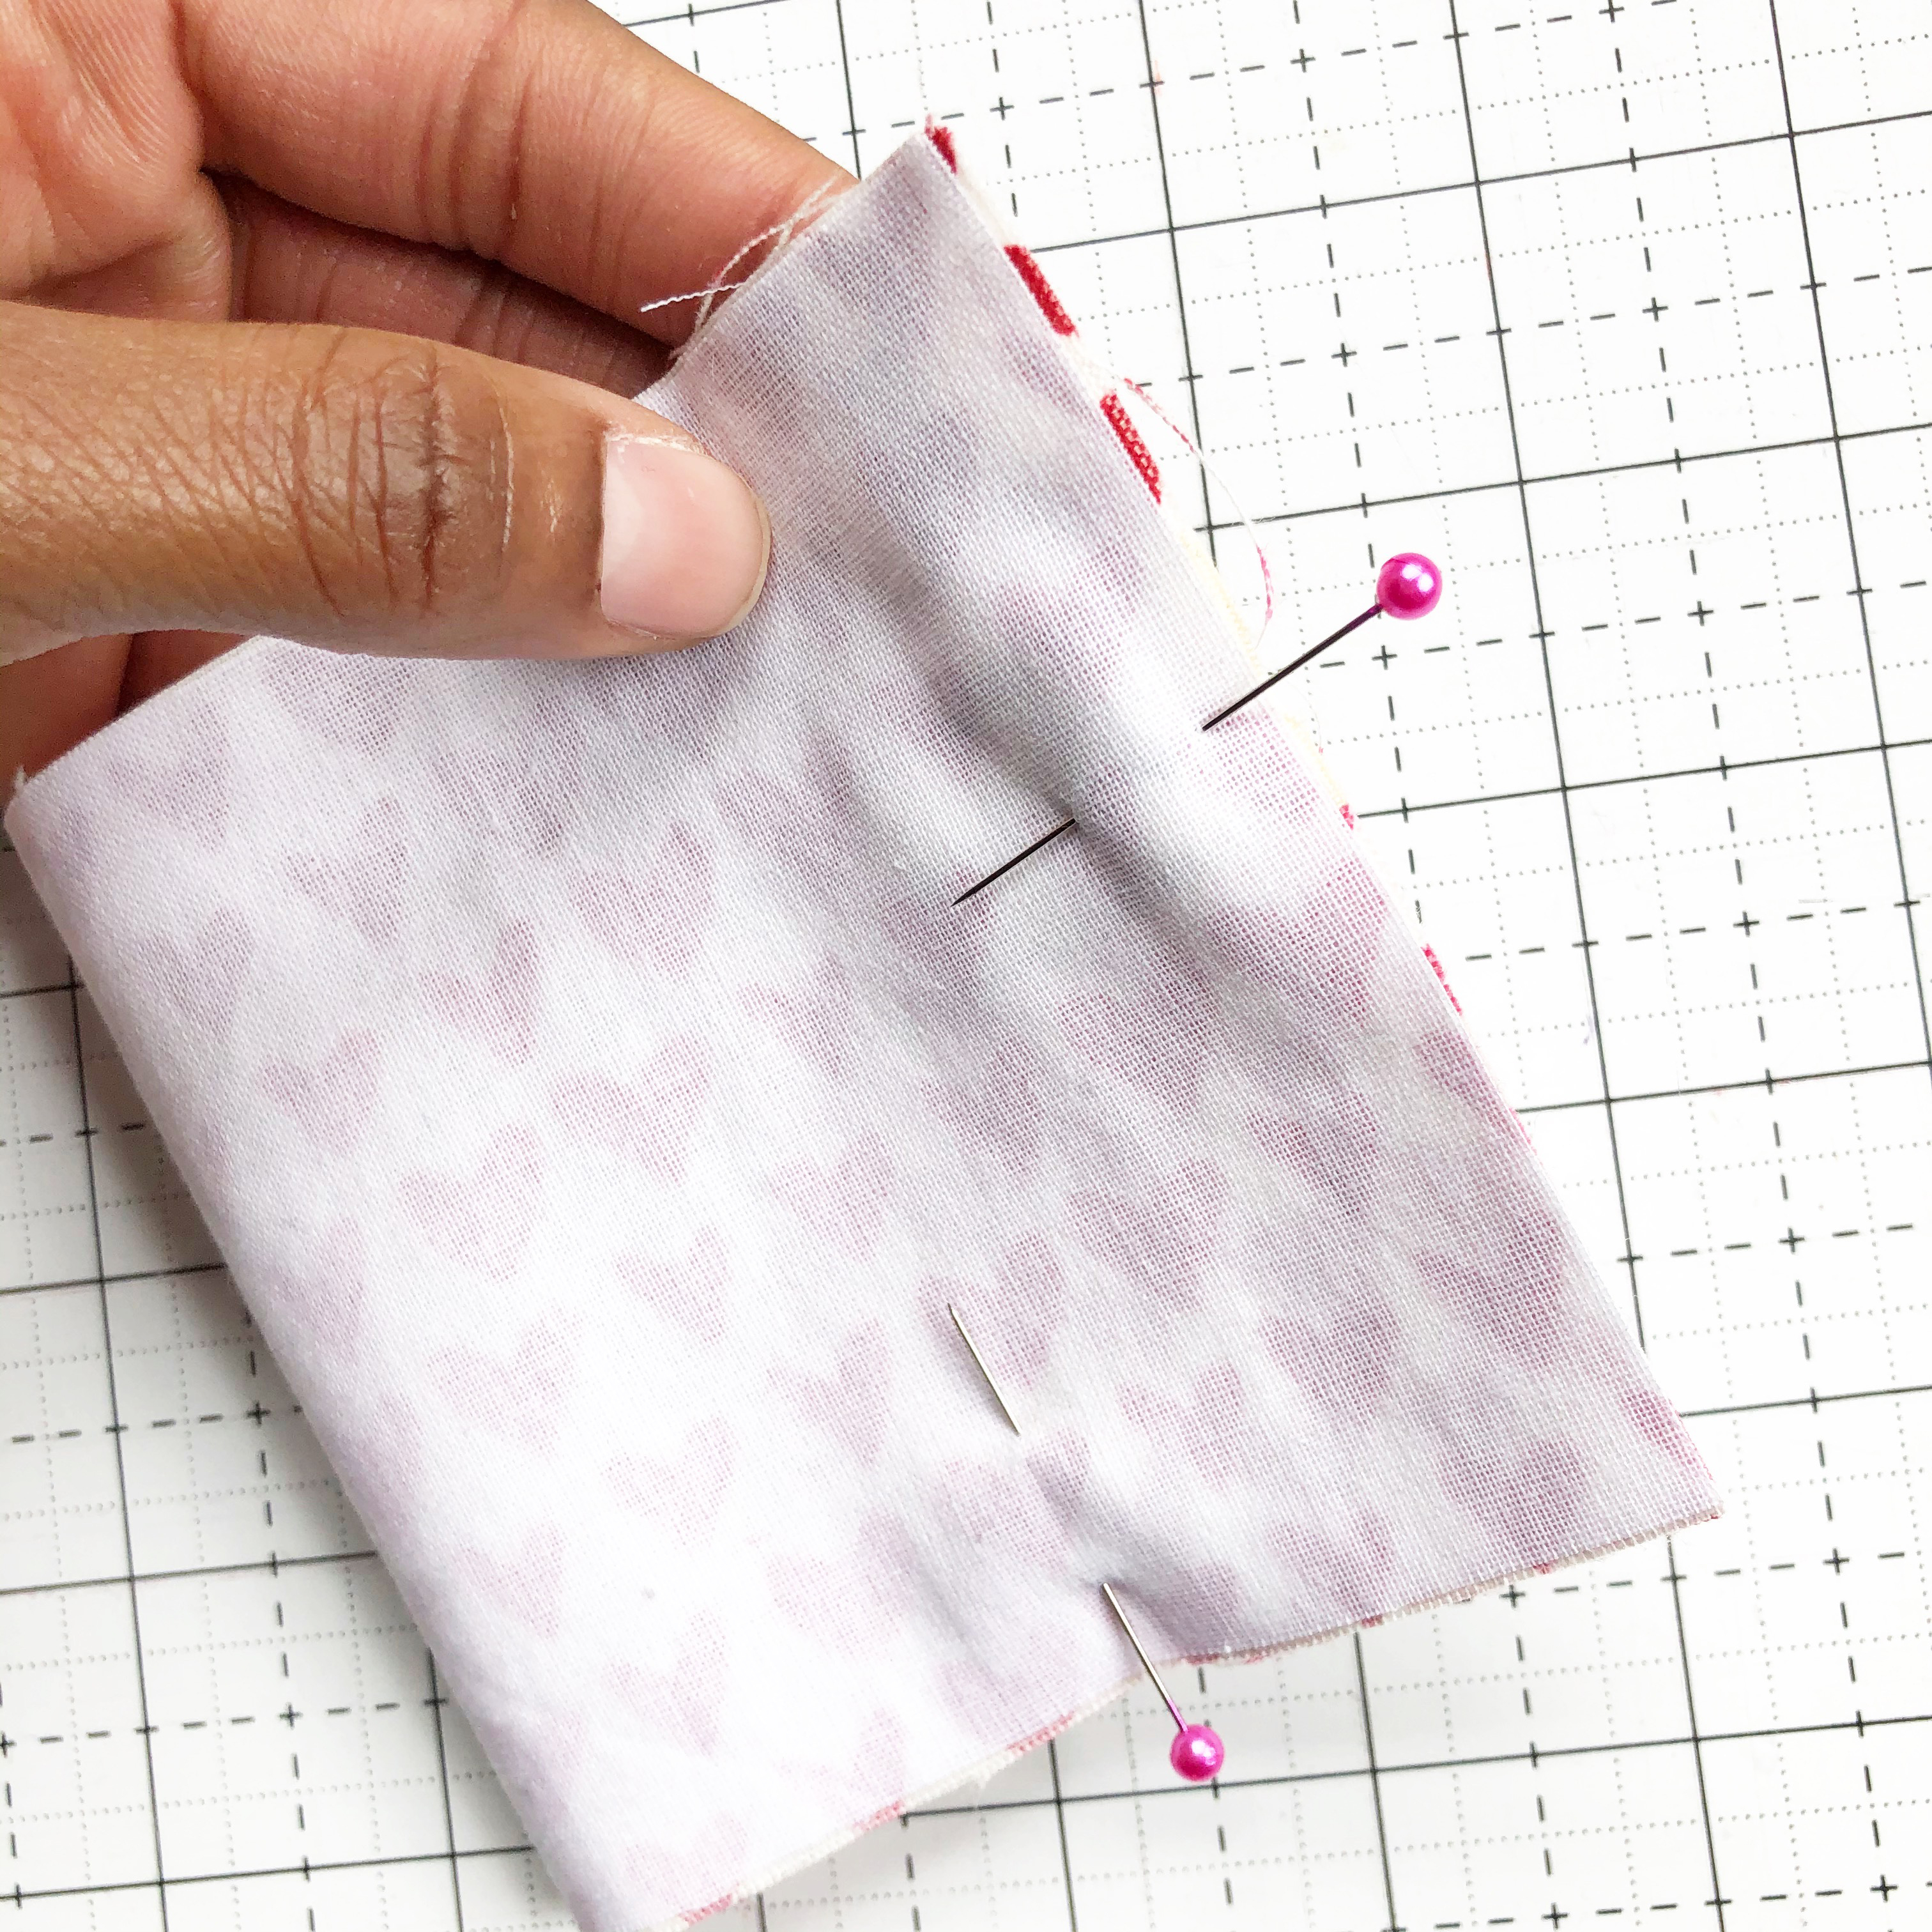 Fabric Weight Tutorial: Preparing the fabric for sewing